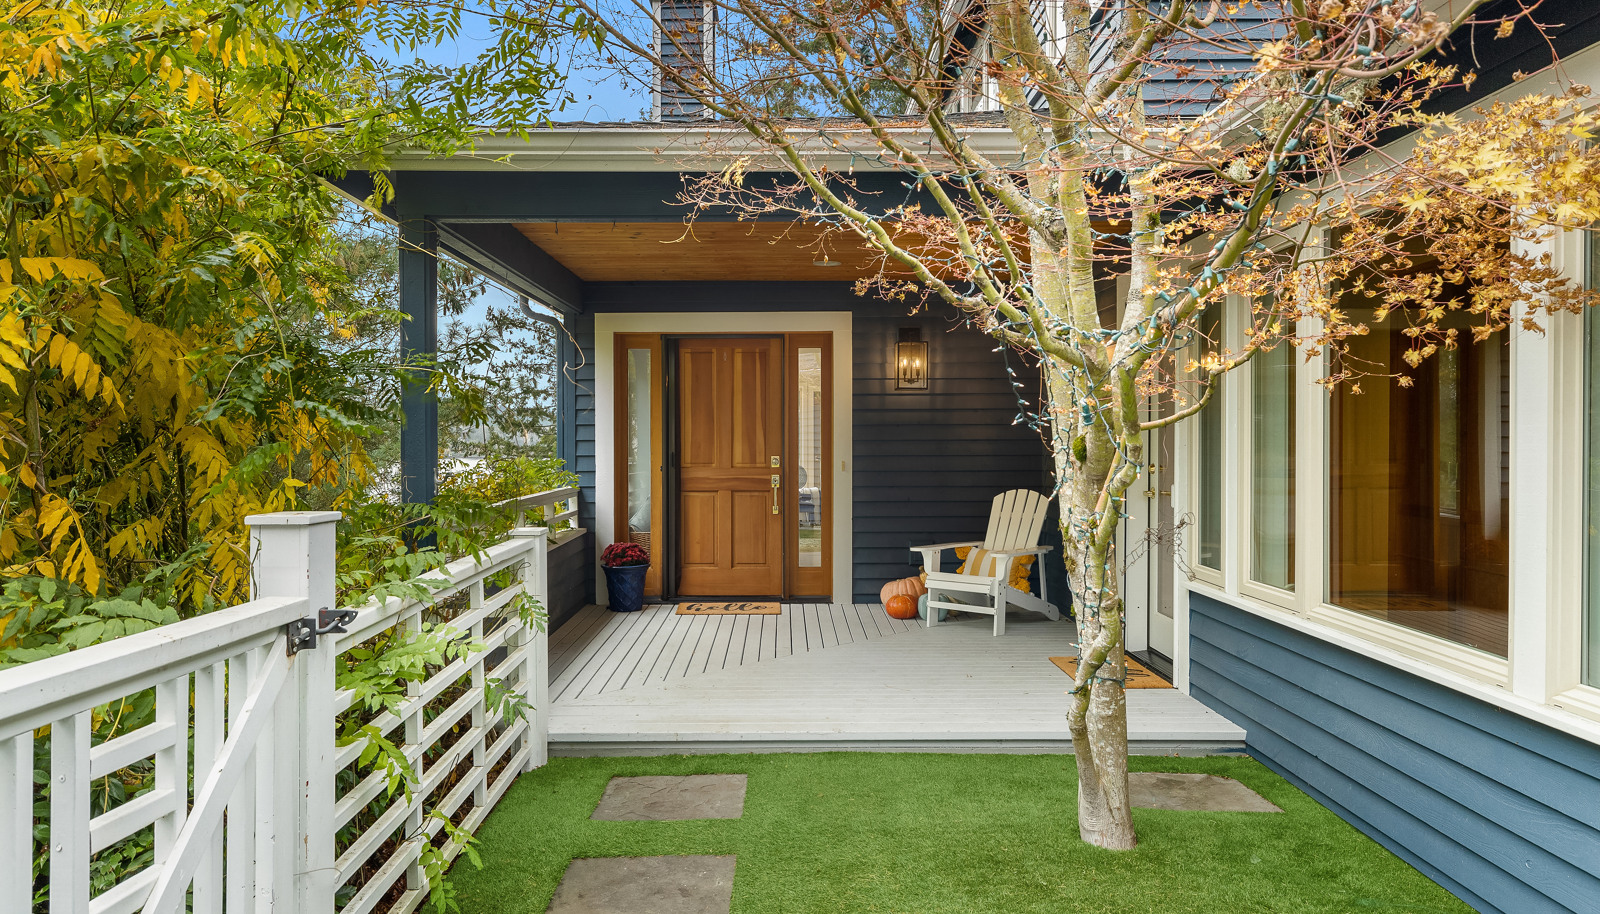 A covered front porch welcomes you to this home.